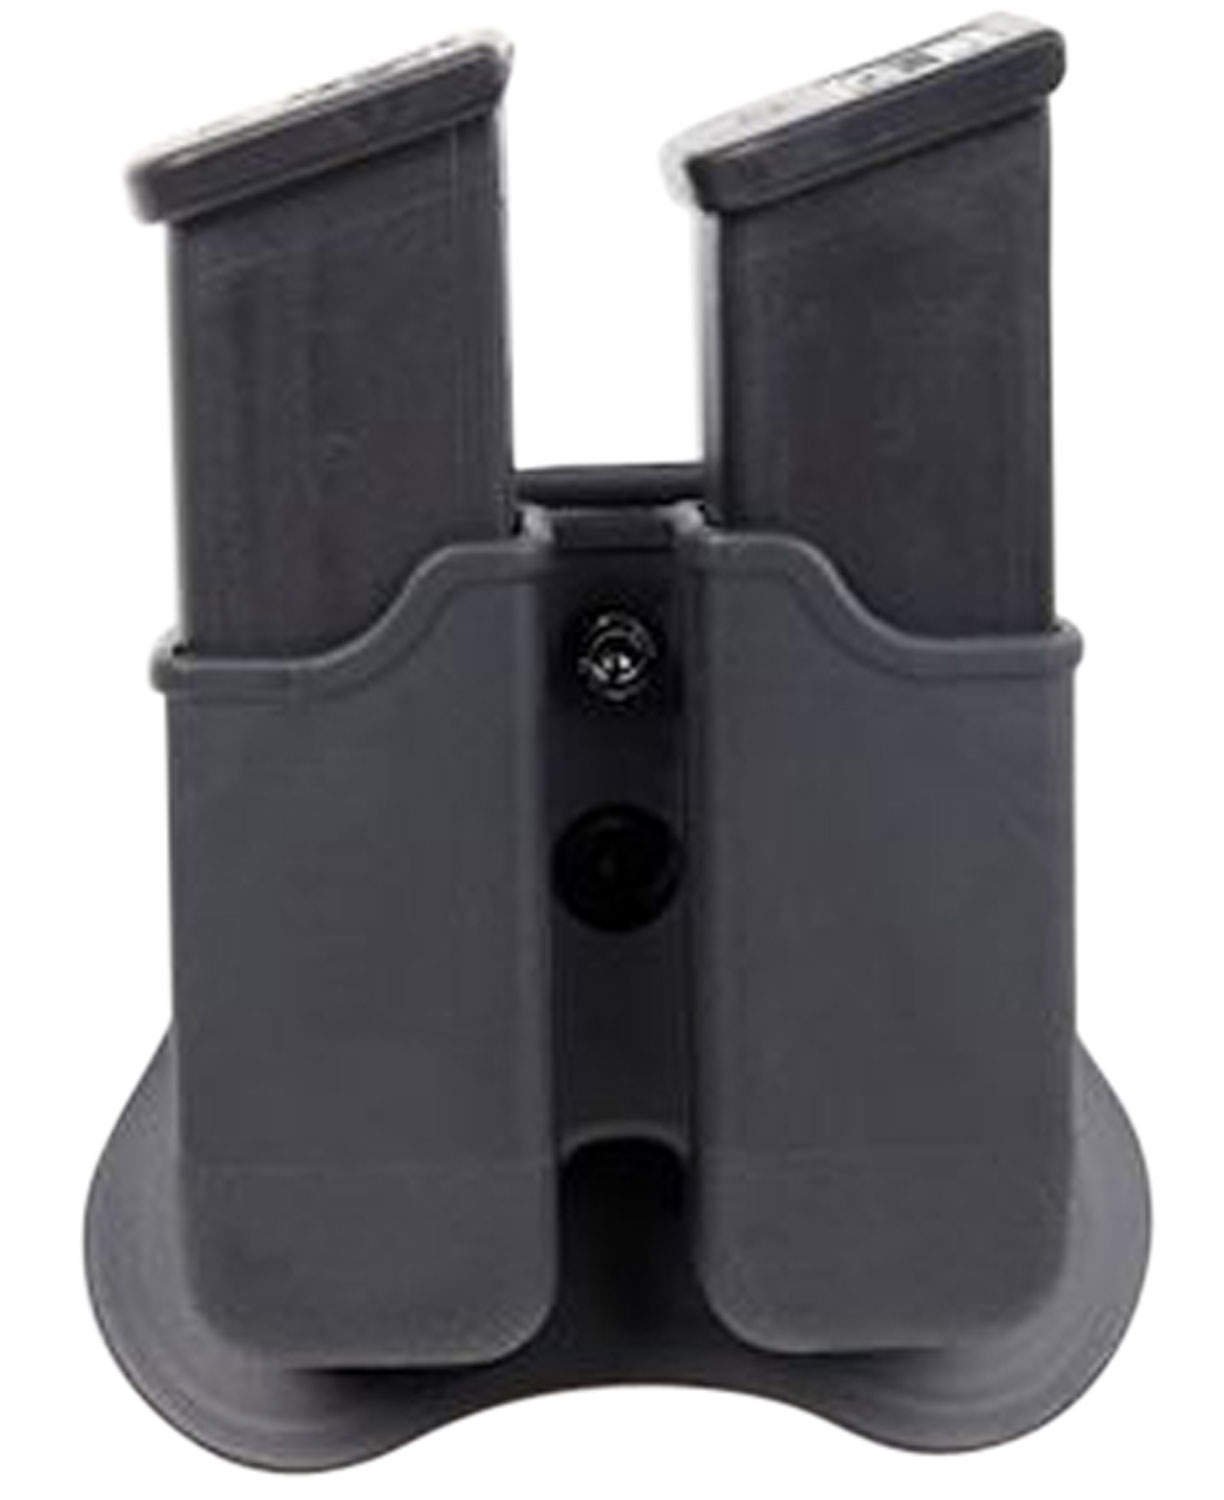 Bulldog PGM Magazine Holder  with Paddle Holds 2 Mags Fits Glock 17,19,22,23,26,27,31,32,33,34 Gen1-4 Black Polymer